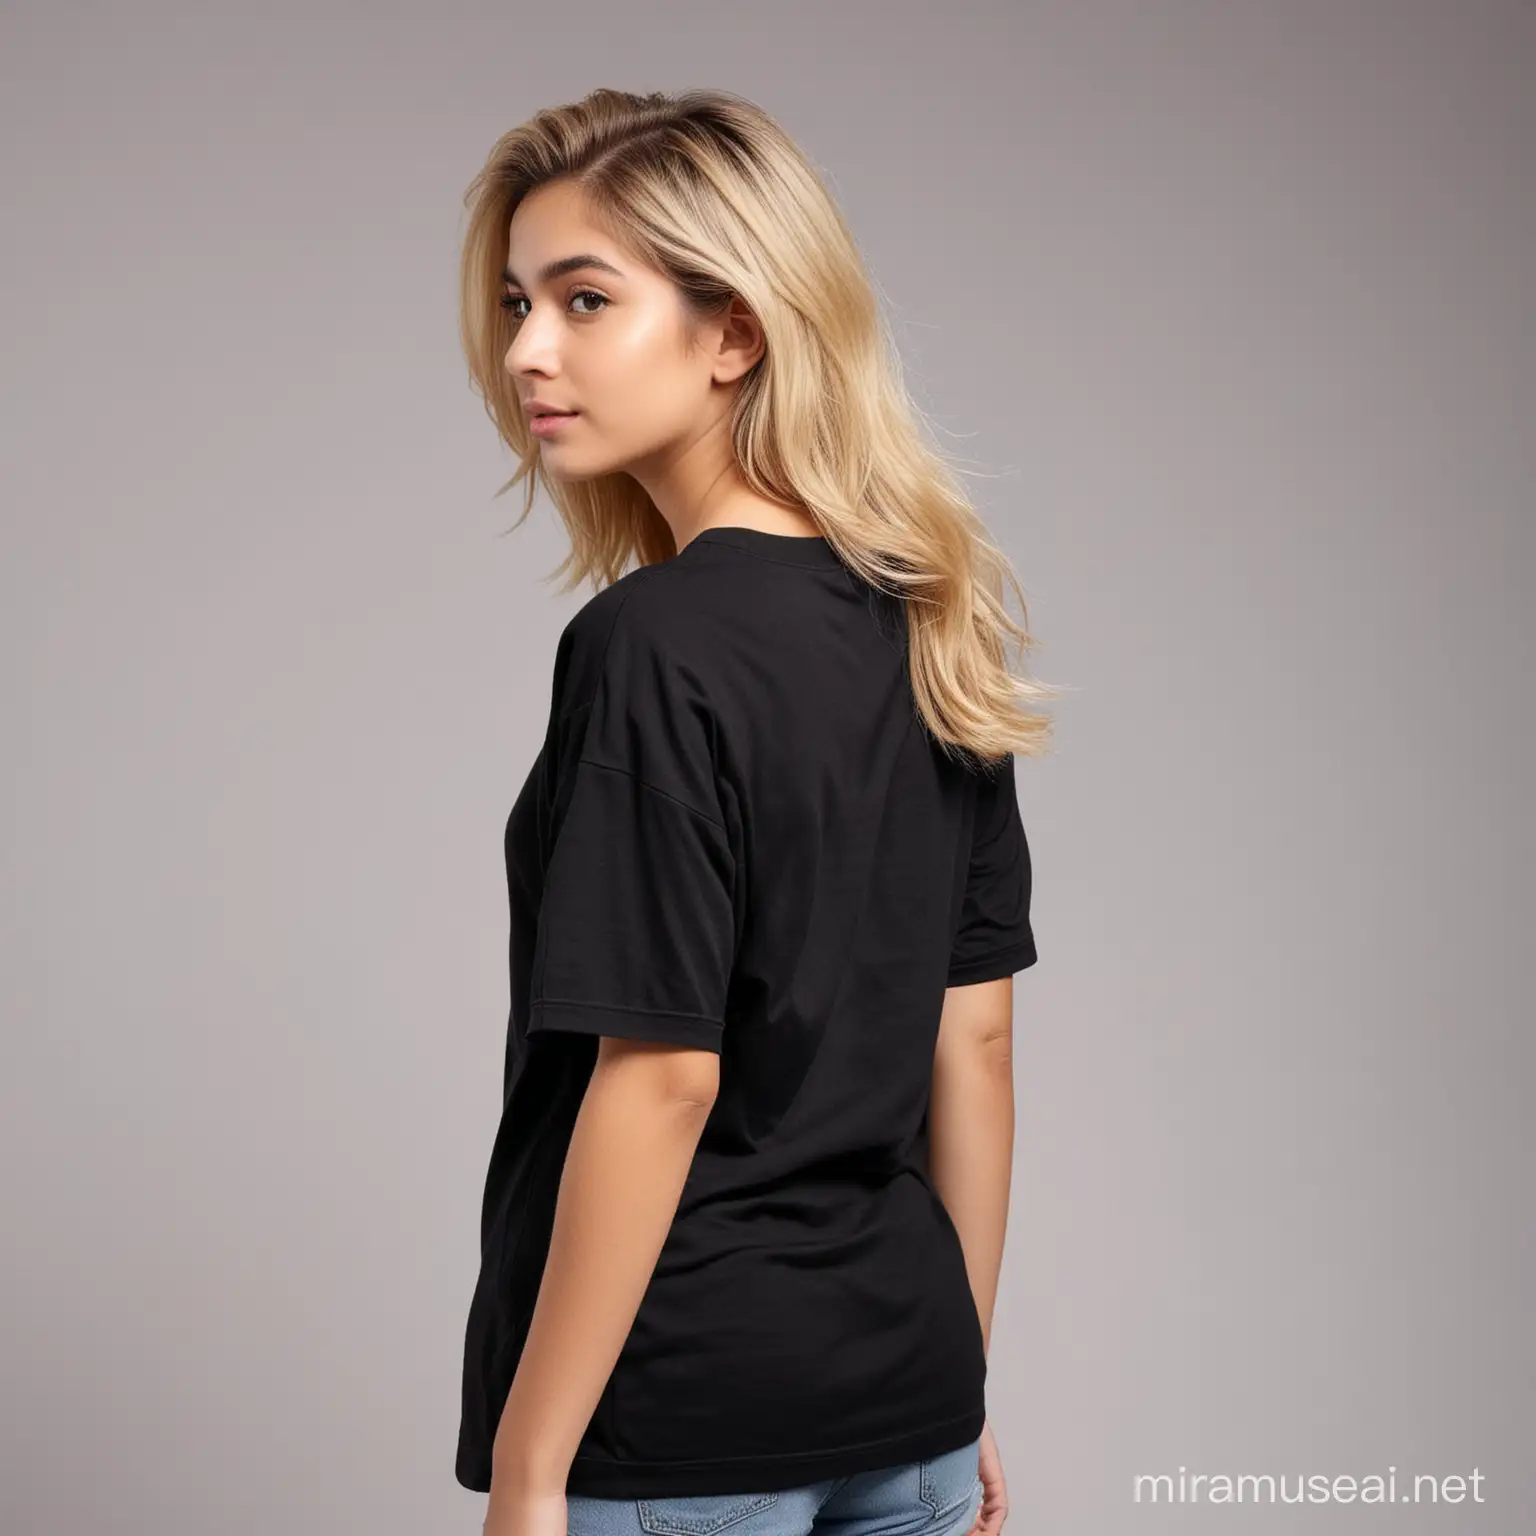 pakistani teen girl blonde hair wearing a plain 
black oversized t shirt with simple background doing a tshirt brand shoot,back view
